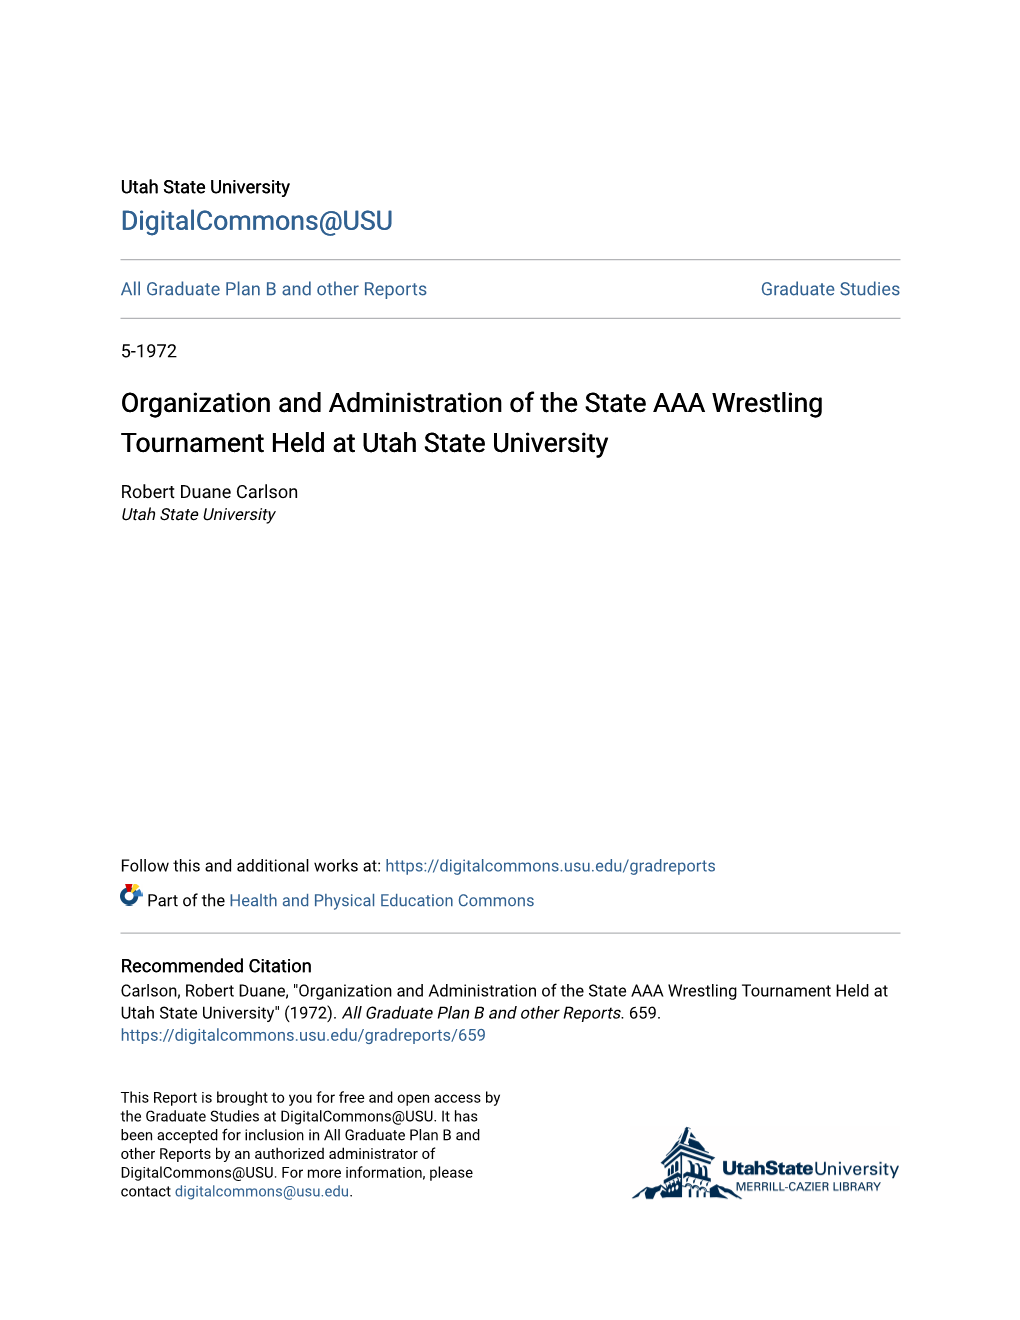 Organization and Administration of the State AAA Wrestling Tournament Held at Utah State University